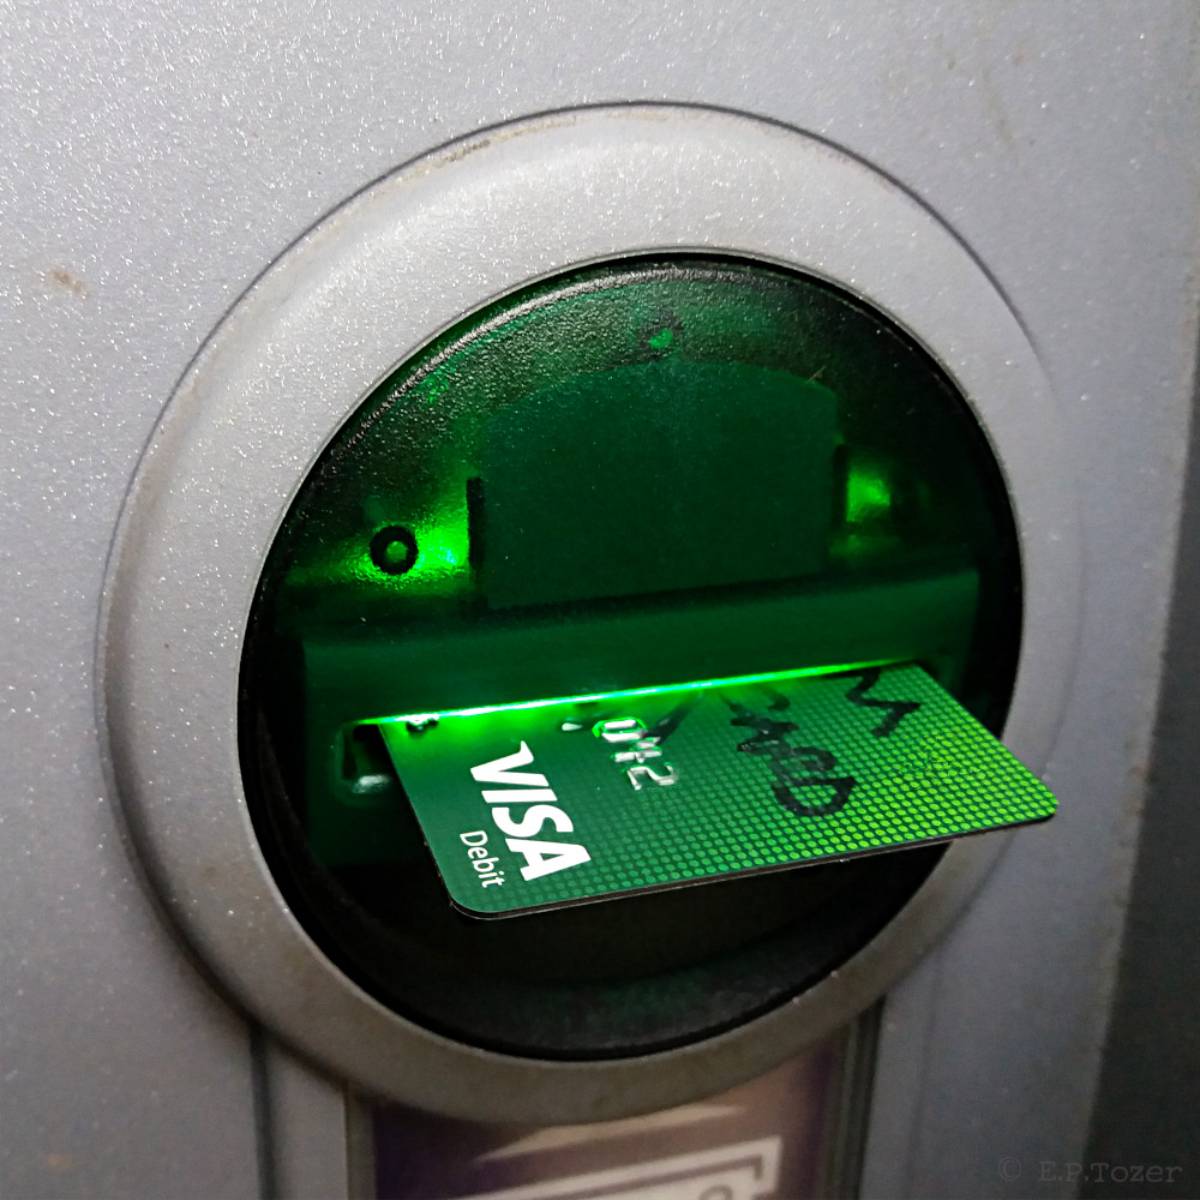 How to Block my ATM Card in Nigeria